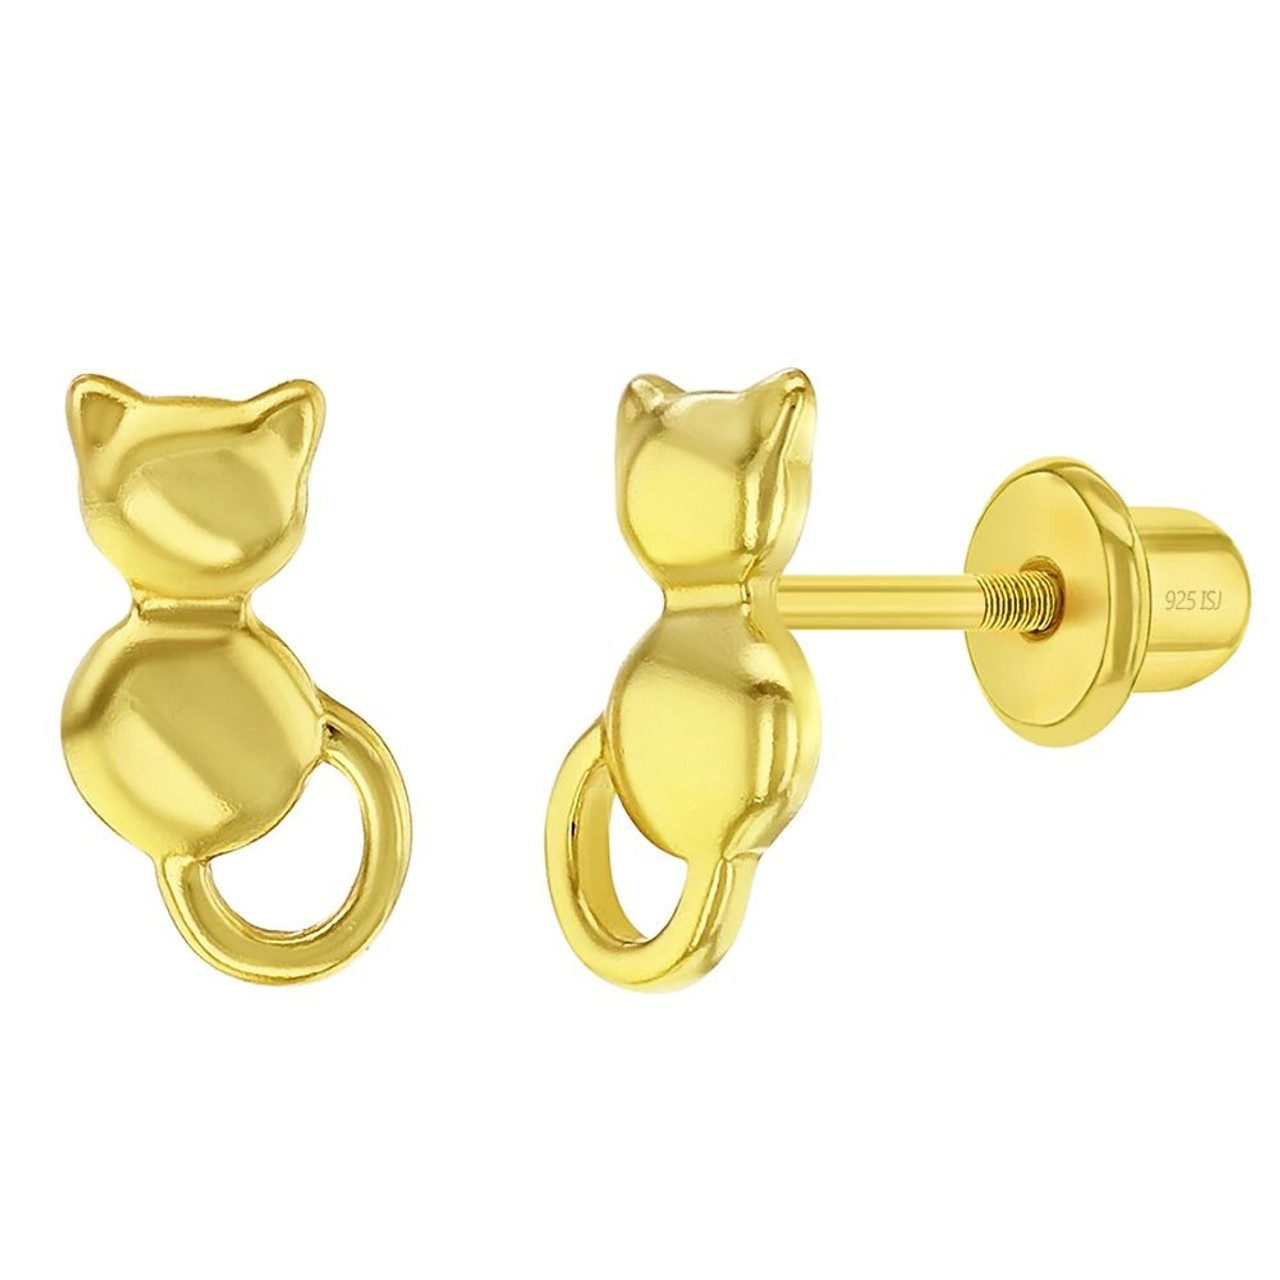 925 Sterling Silver Kitty Cat Screw Back Earrings for Young Girls